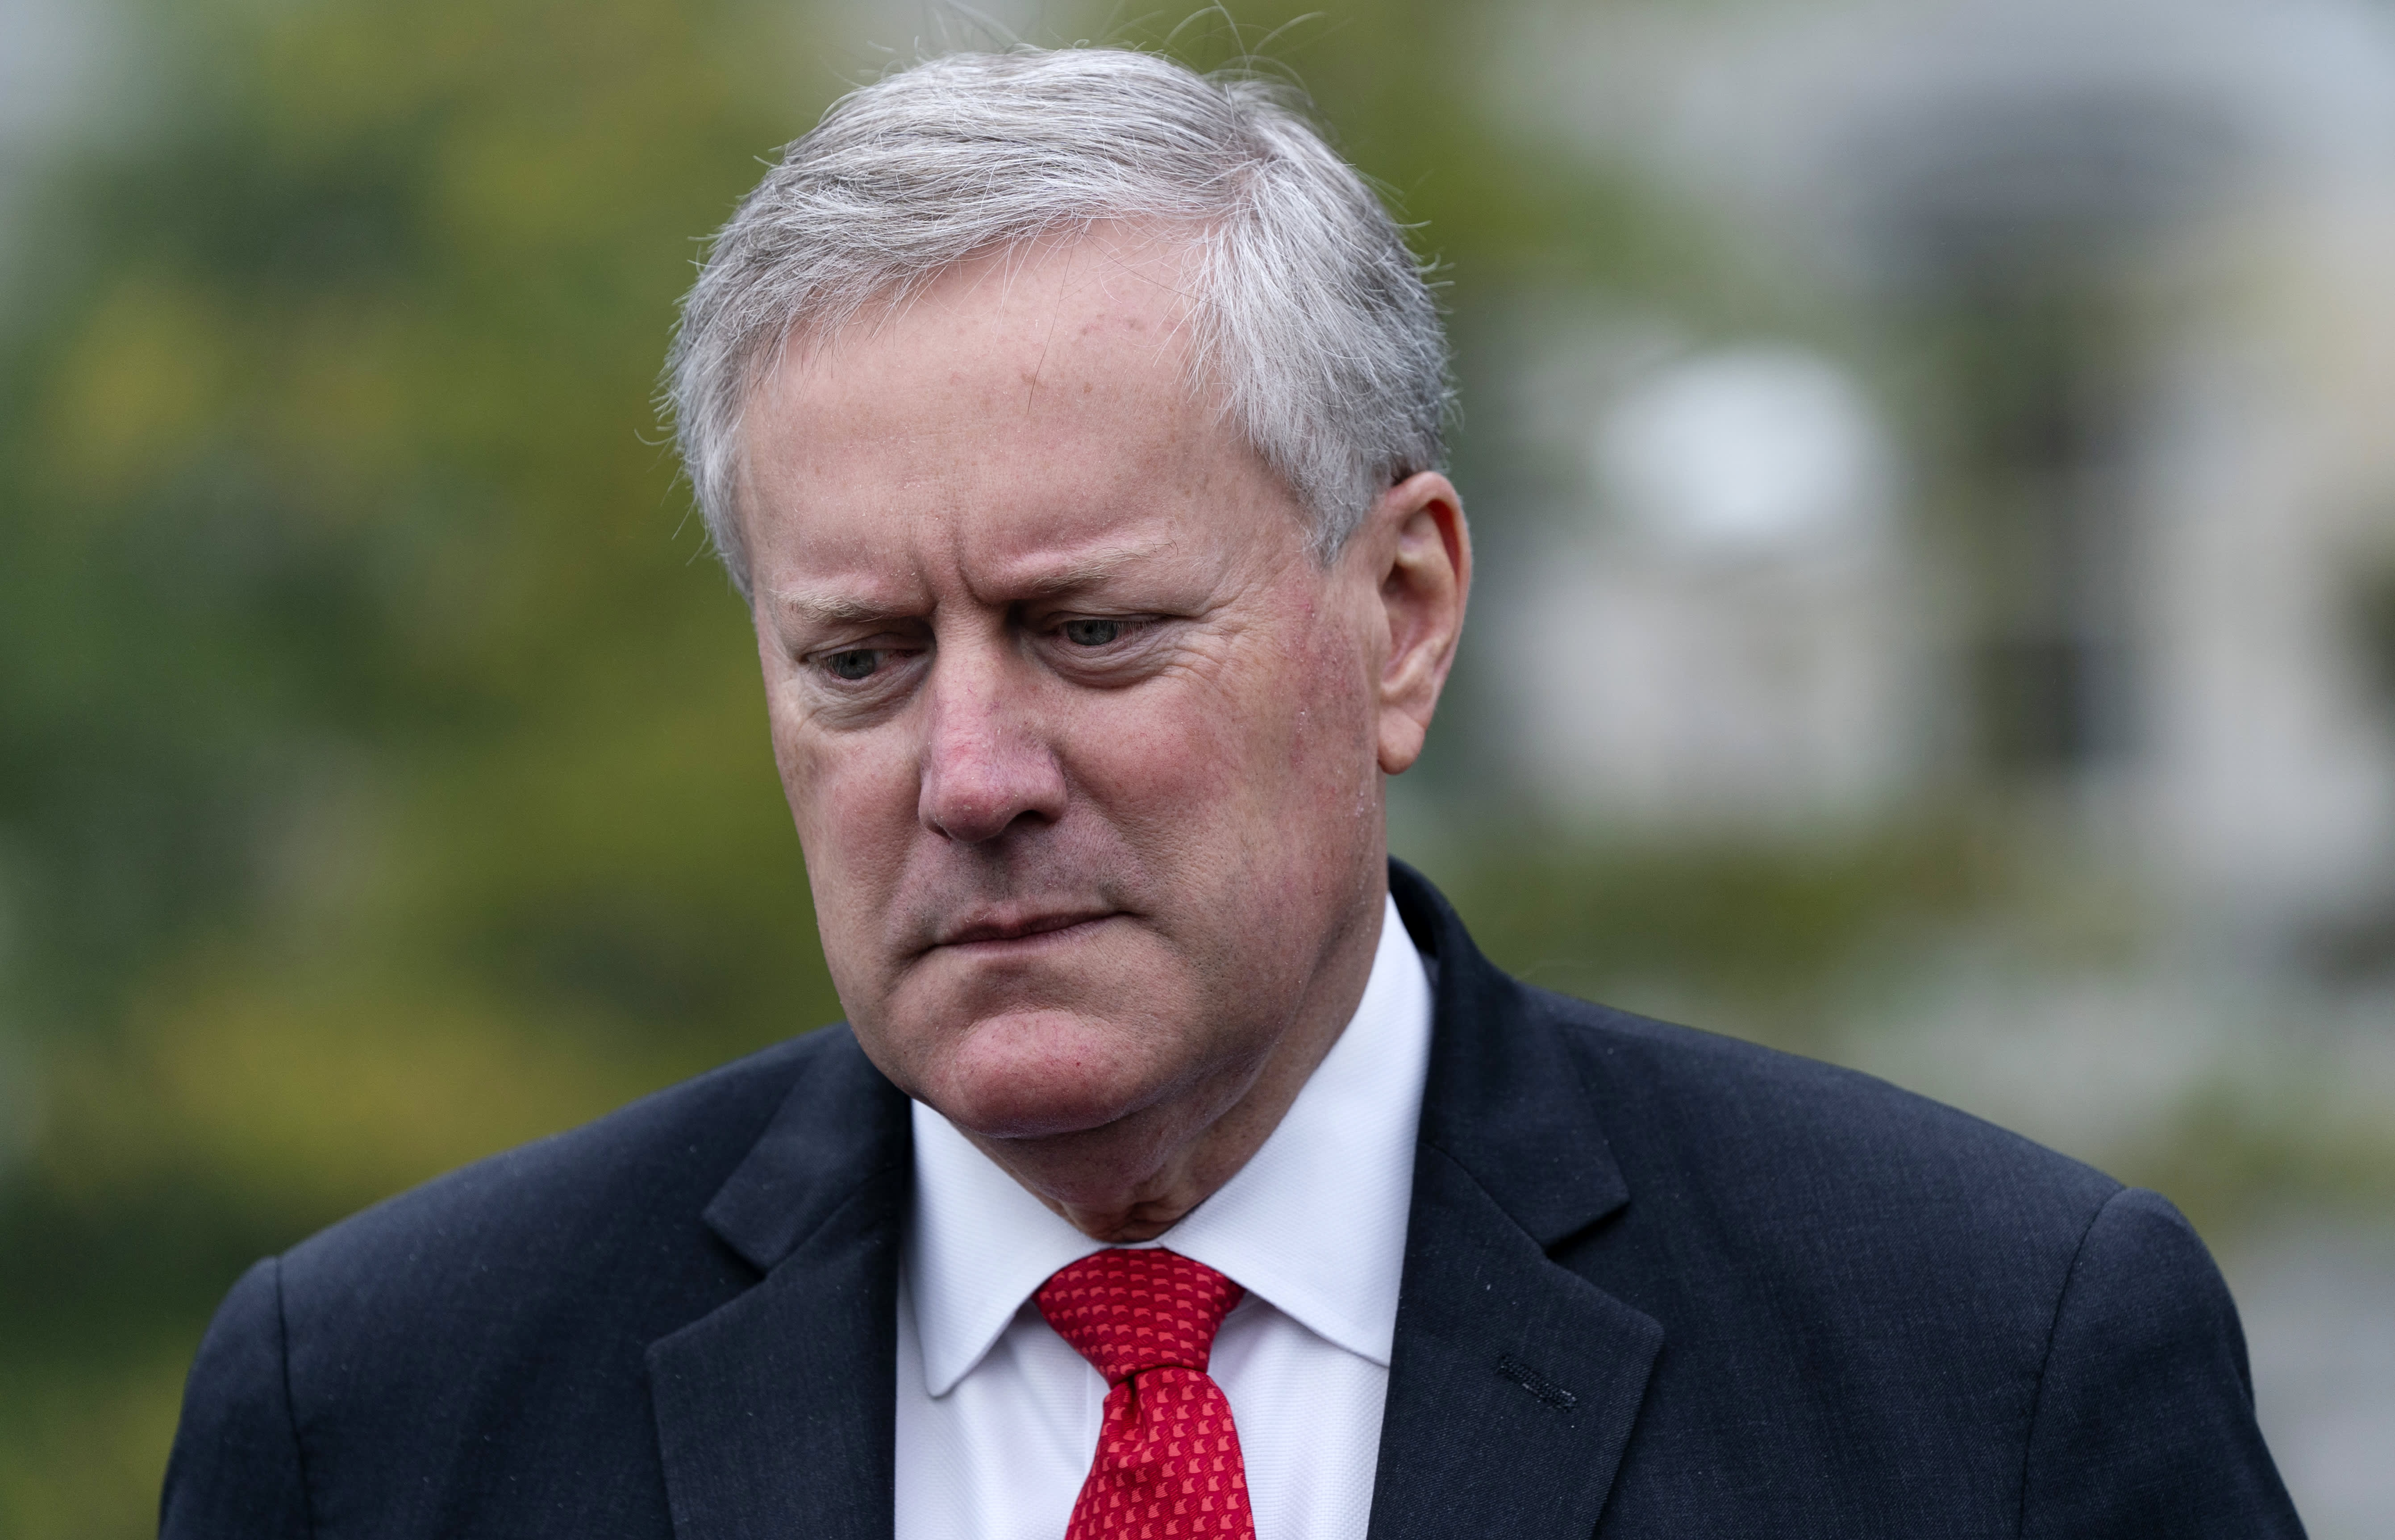 House Jan. 6 probe sheds light on Trump aide Mark Meadows’ records before contem..